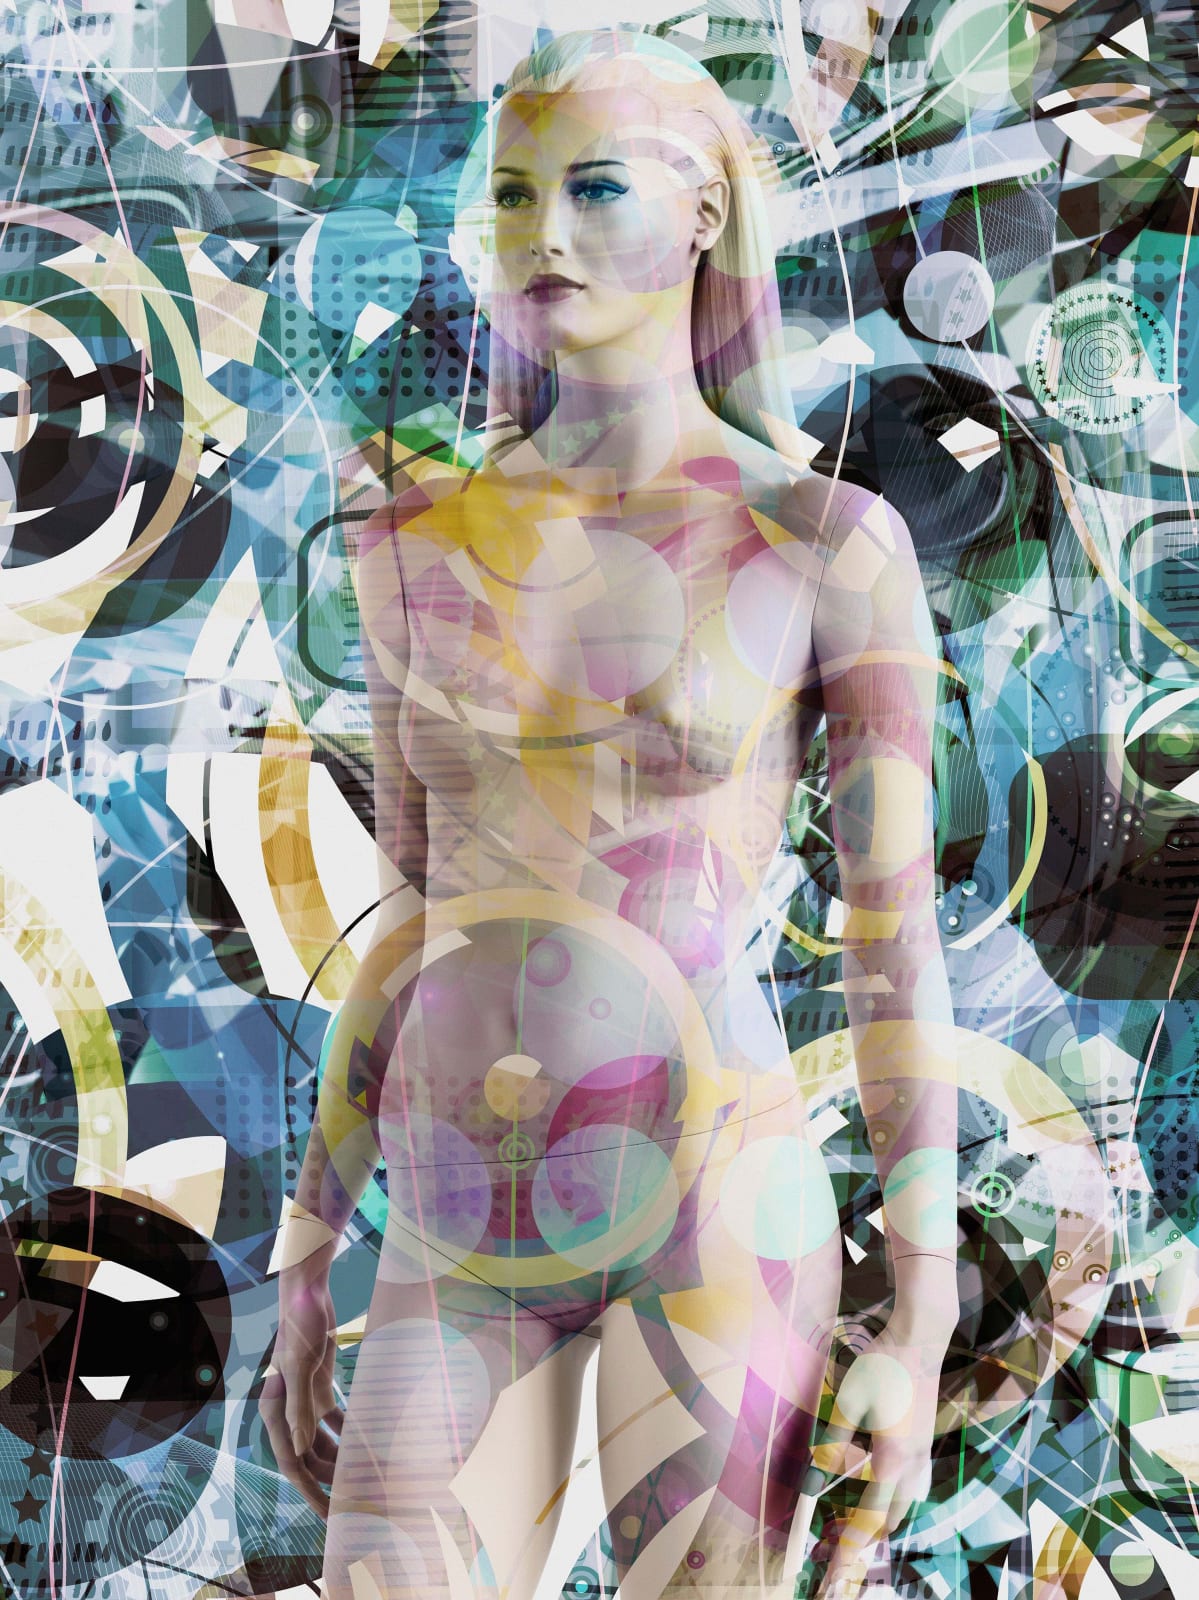 Valérie Belin Ishtar Super Models nude blonde mannequin with multiple exposure image with blue and green abstract shapes 